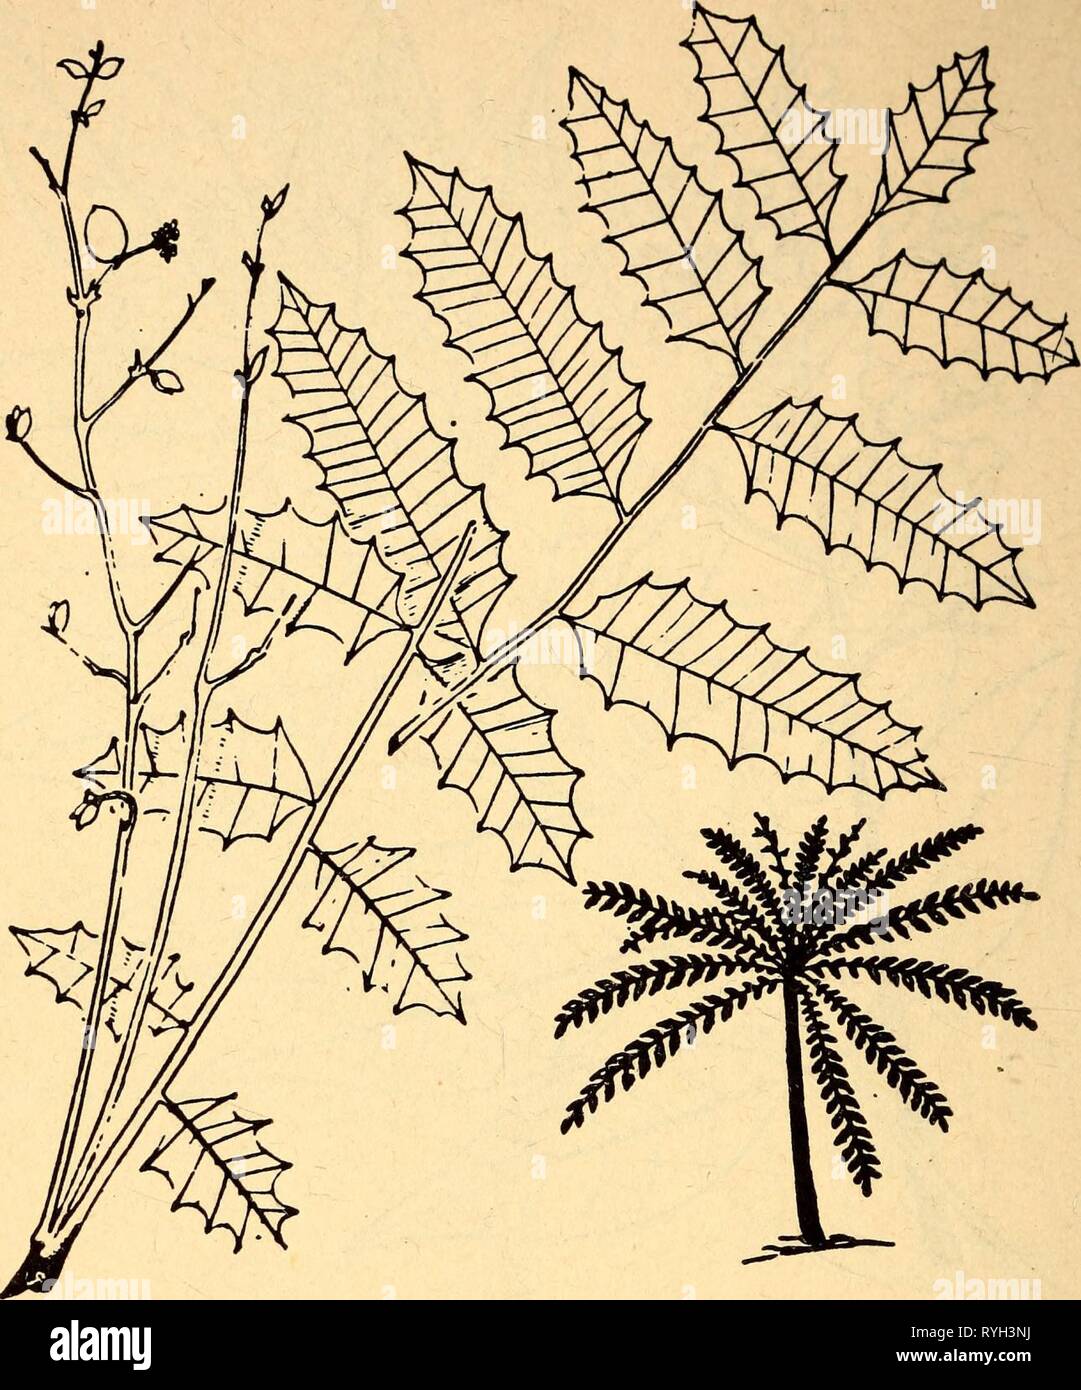 Edible and poisonous plants of the Caribbean region  ediblepoisonousp00dahl Year: 1944  80    62. Guao Comocladia POISON The sap of some species of this plant causes blistering and prolonged inflammation of the skin similar to that caused by poison ivy. Numerous varieties grow in Mexico, Guatemala and the West Indies. On the mainland, they are not found below Guatemala. These bushy or small trees have long leaf stems but only a few or no branches. The leaves (which are often very spiny), are clustered at the ends of the branches, and the flowers are small and greenish. Alternate names are maiz Stock Photo